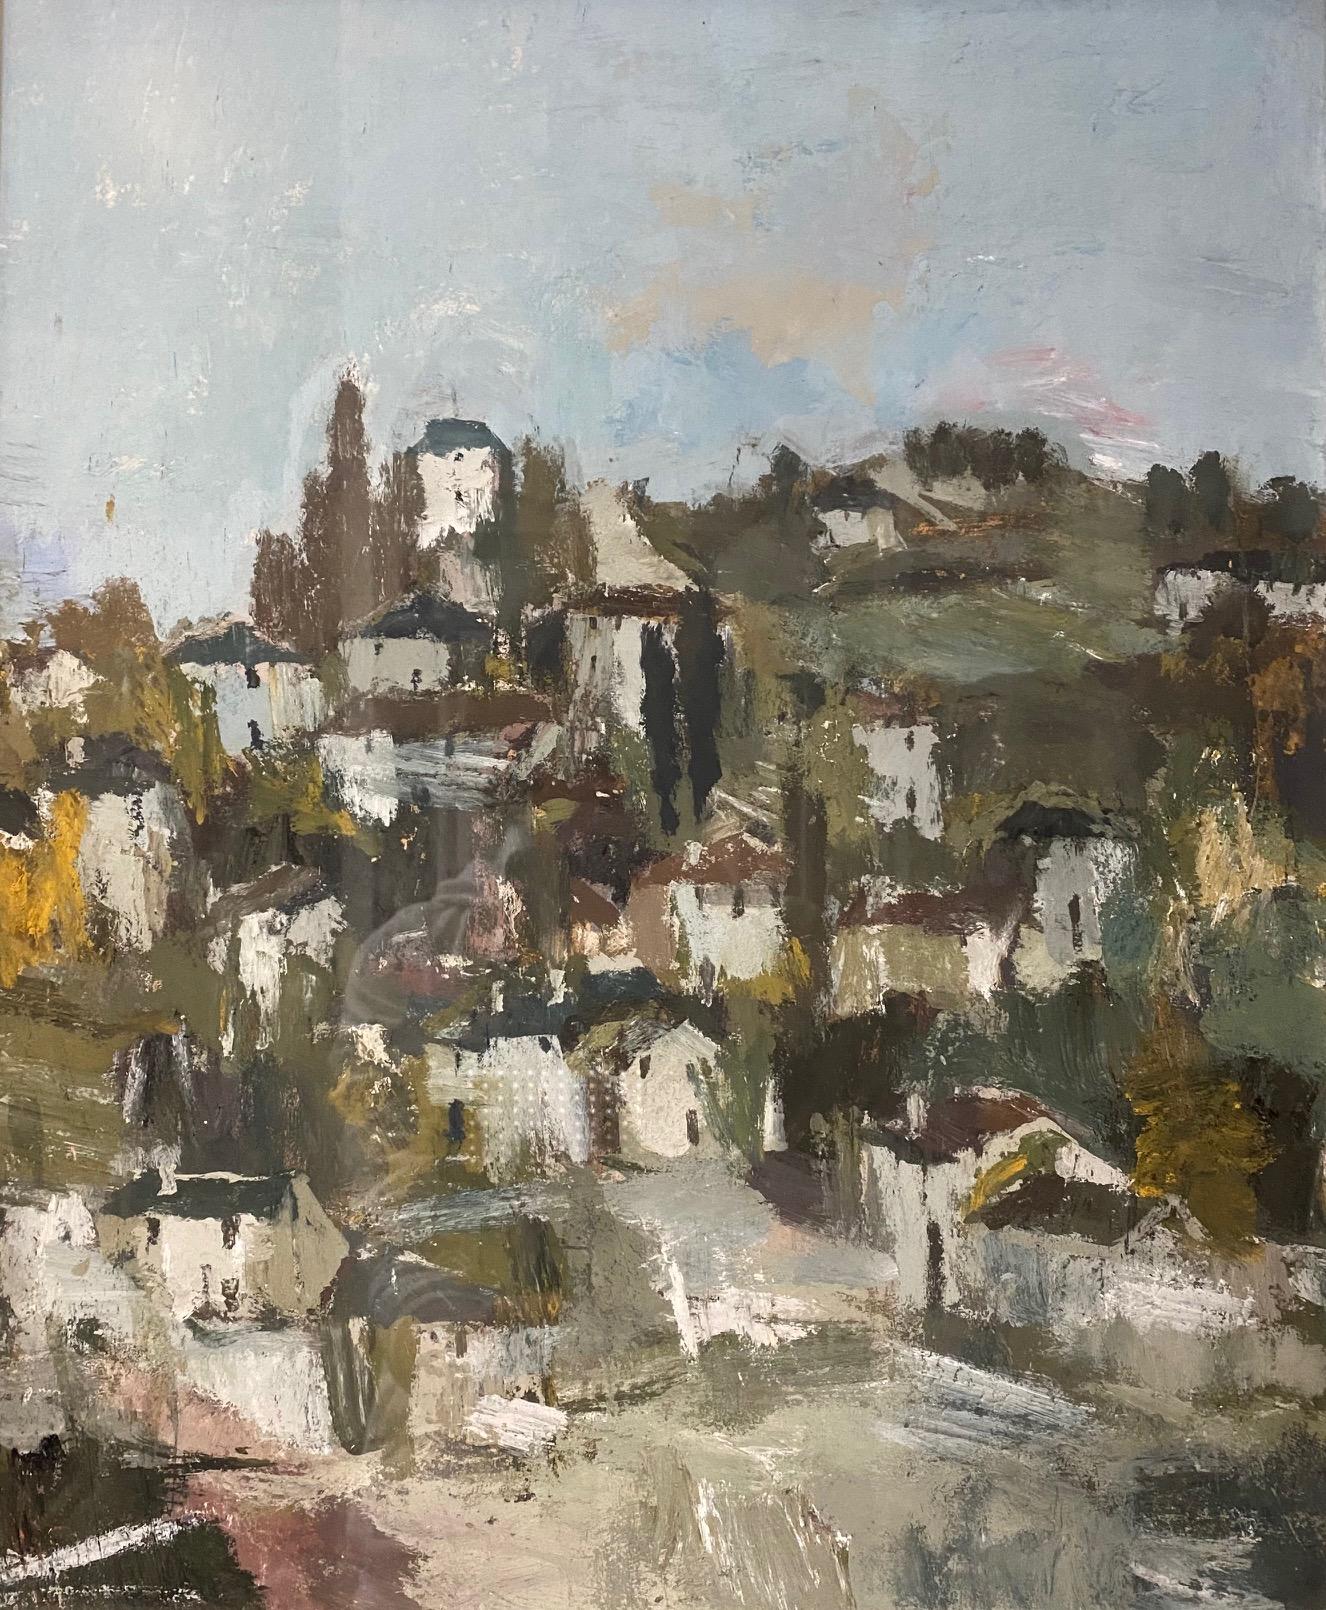 Village view by Baldo Guberti - Oil on paper and canvas 38x46 cm